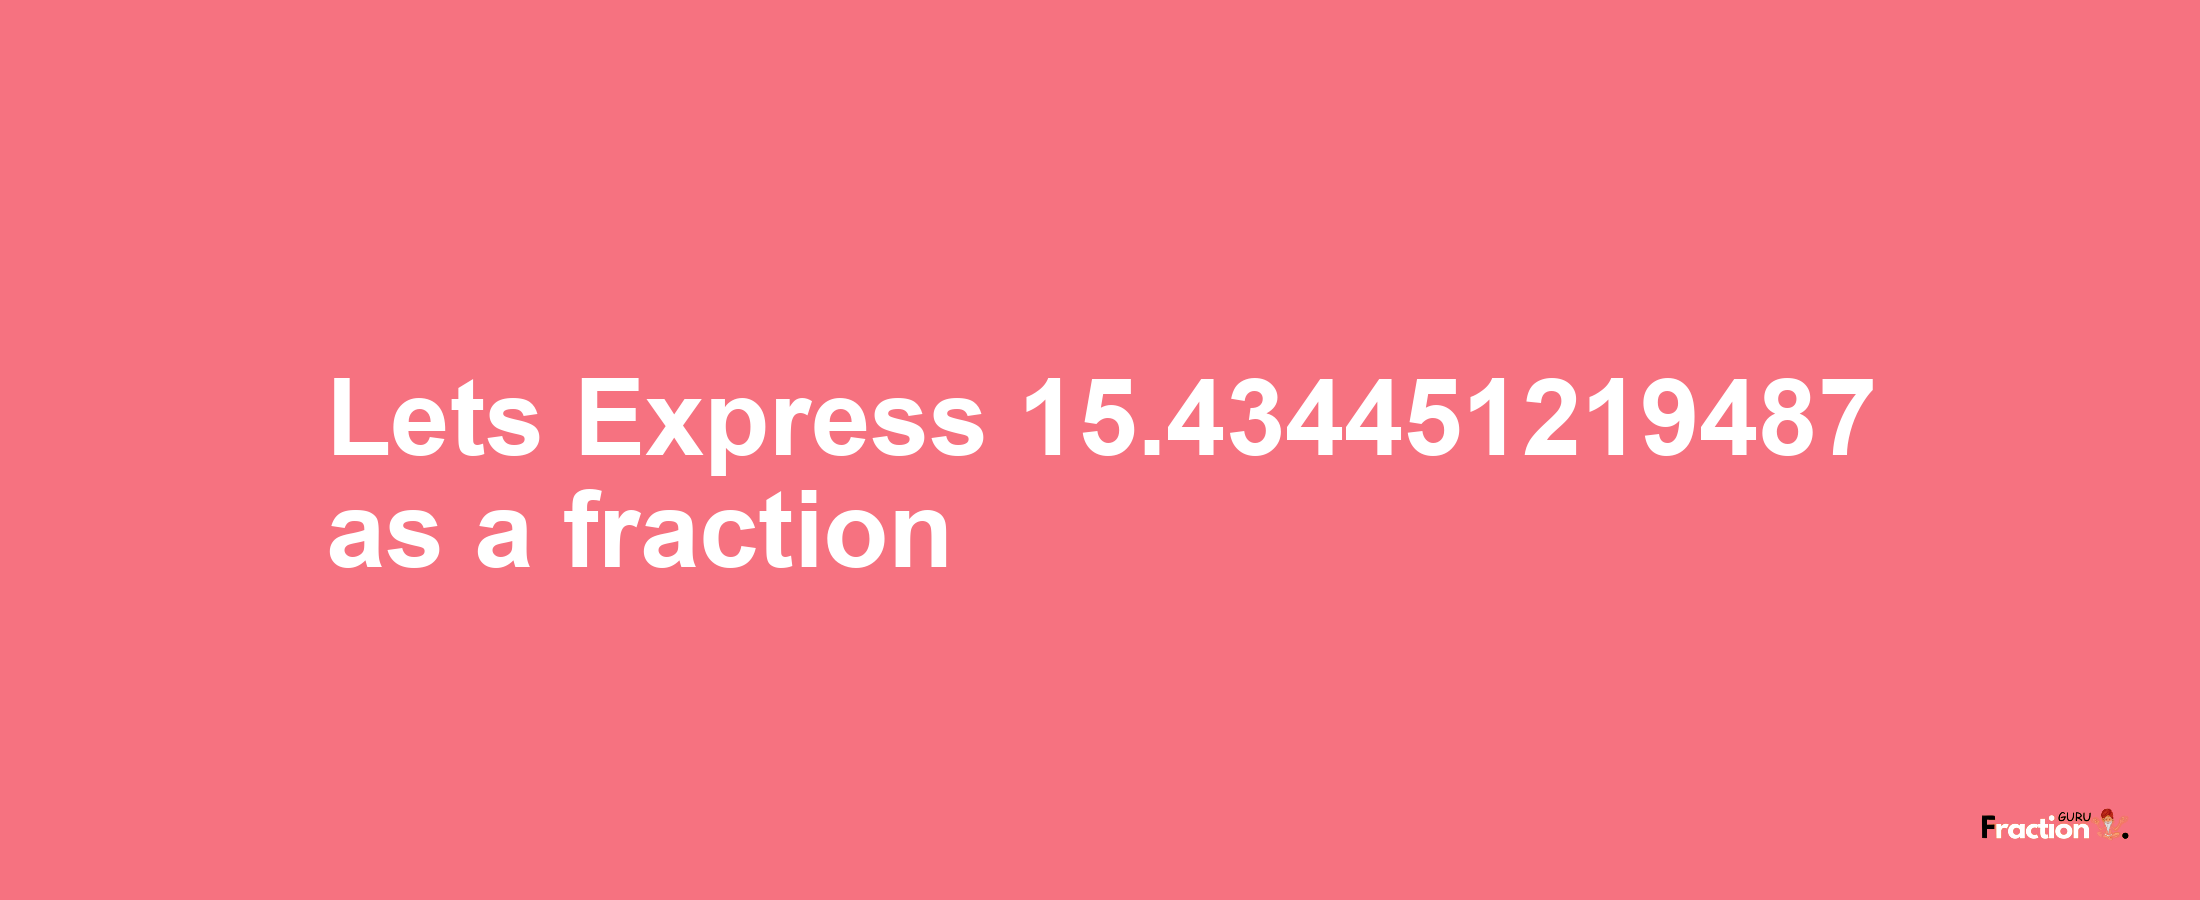 Lets Express 15.434451219487 as afraction